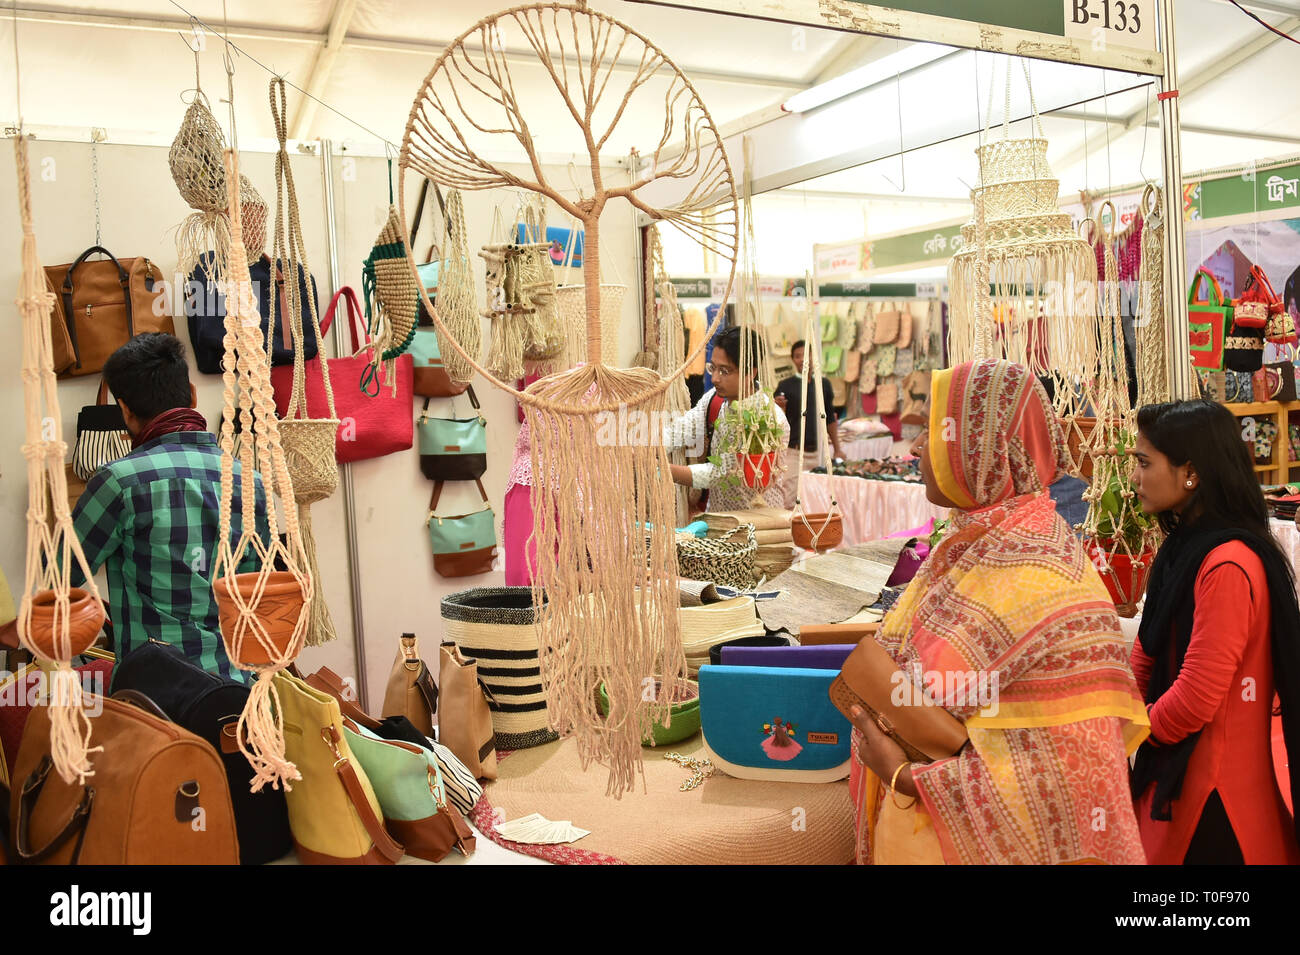 Dhaka, Bangladesh. 19th Mar, 2019. Visitors look at jute products at a stall during Bangladesh's National Small and Medium Enterprise (SME) Fair-2019 in Dhaka, capital of Bangladesh, March 19, 2019. The fair aimed at promoting the SME products and introduction of SME goods for expanding business, trade and commerce. The fair will open until March 22. Credit: Stringer/Xinhua/Alamy Live News Stock Photo